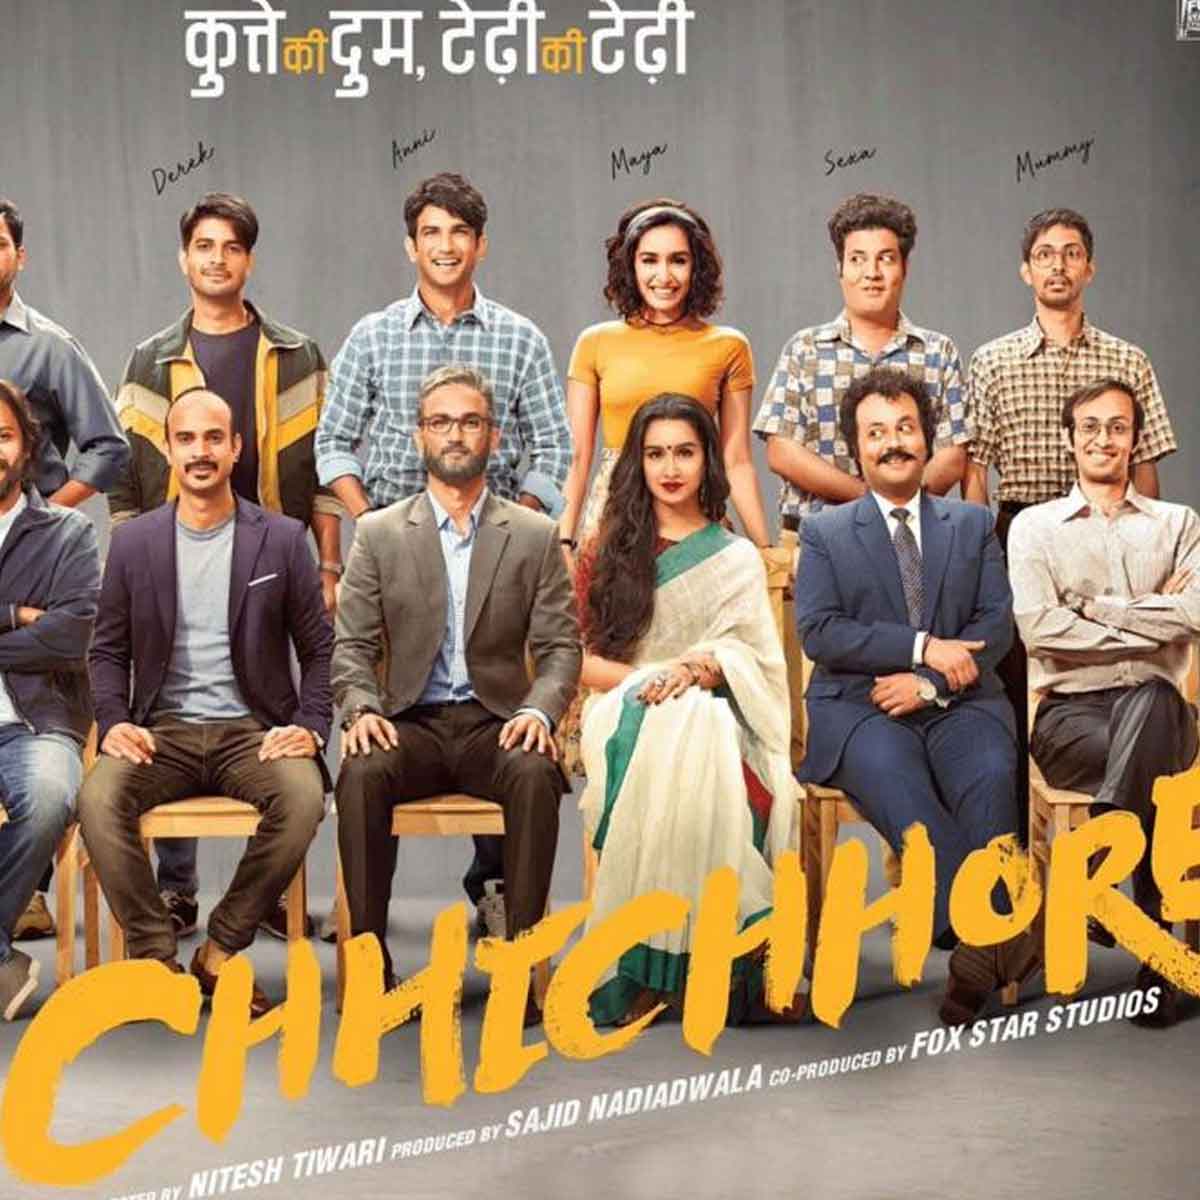 Sushant Singh Rajput's Chhichhore gets a release date in China; Great news for Aamir Khan's Laal Singh Chaddha